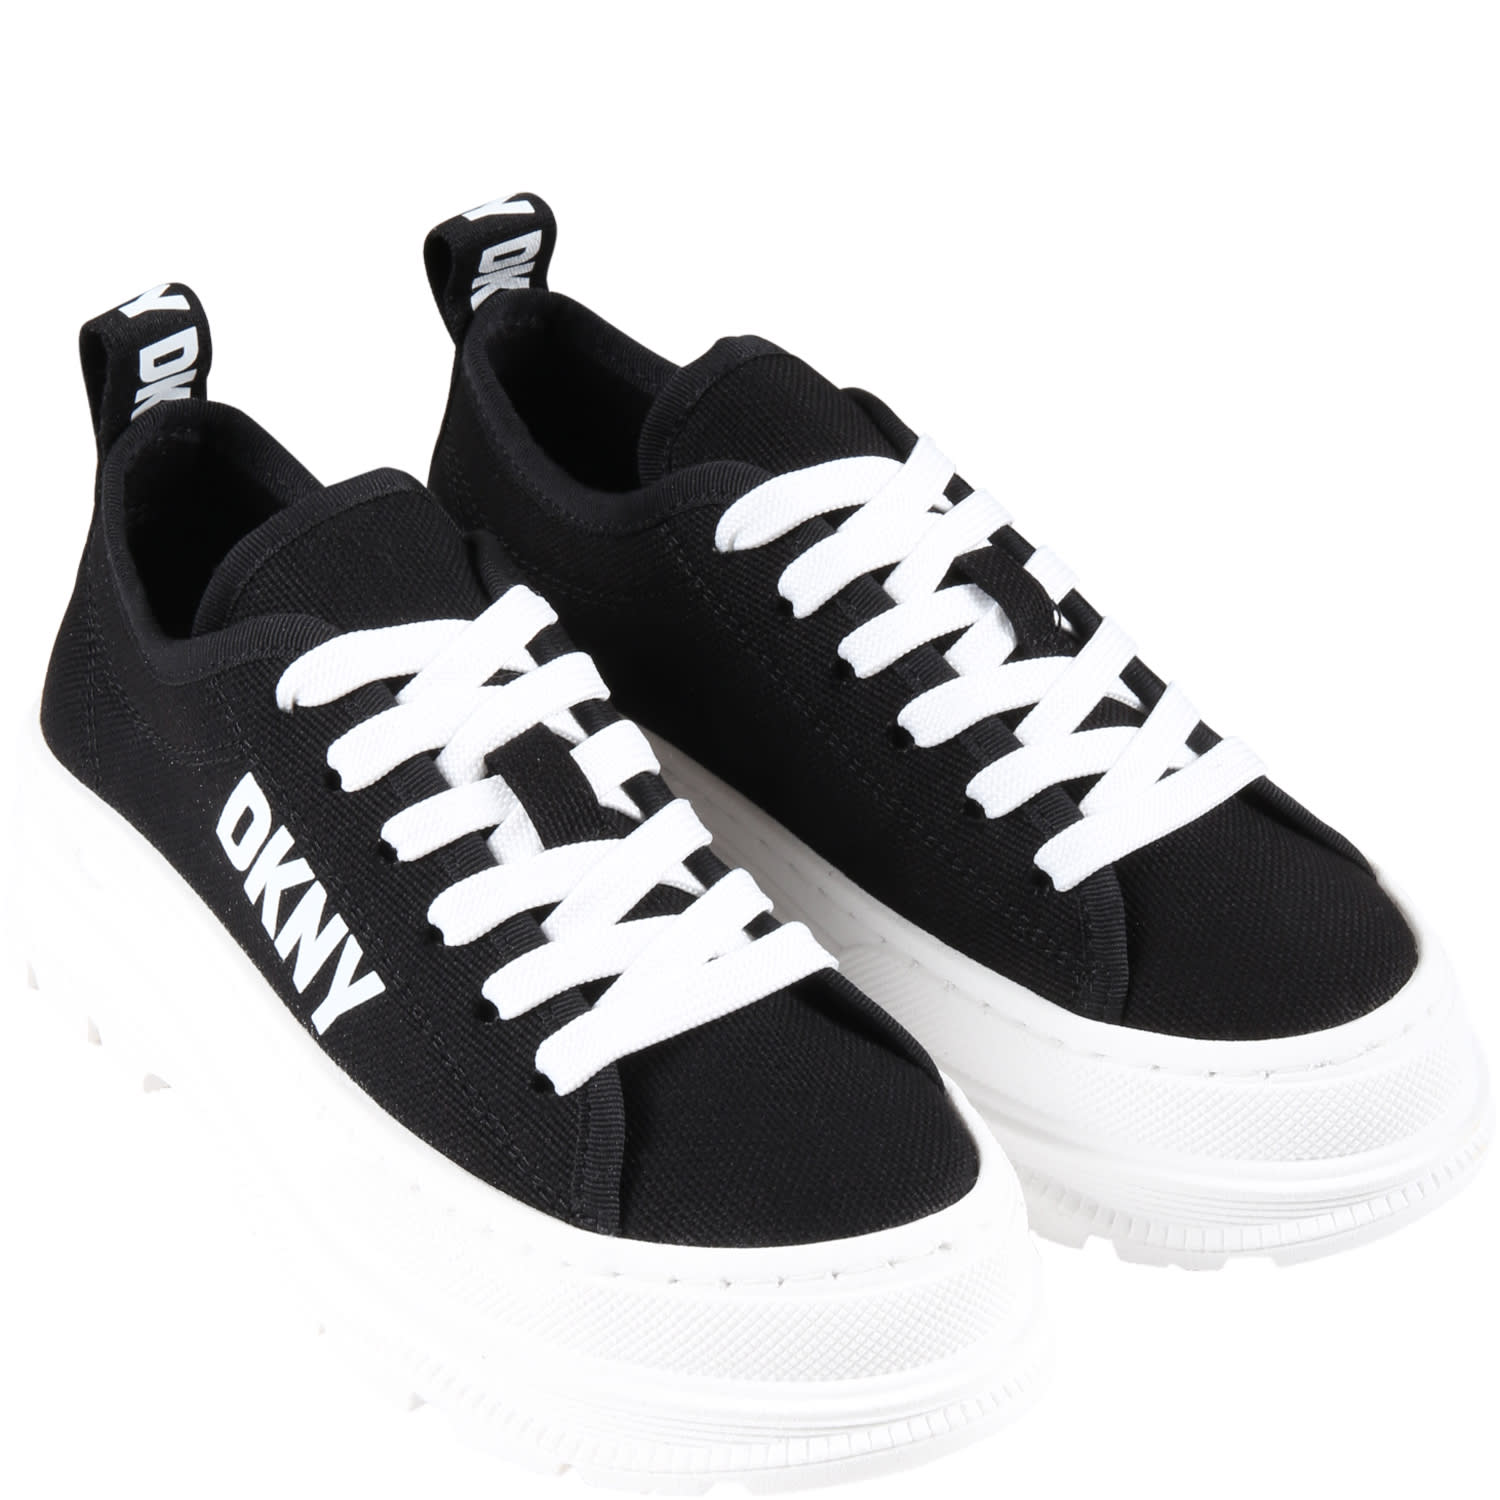 DKNY BLACK SNEAKERS FOR GIRL WITH WHITE LOGO 